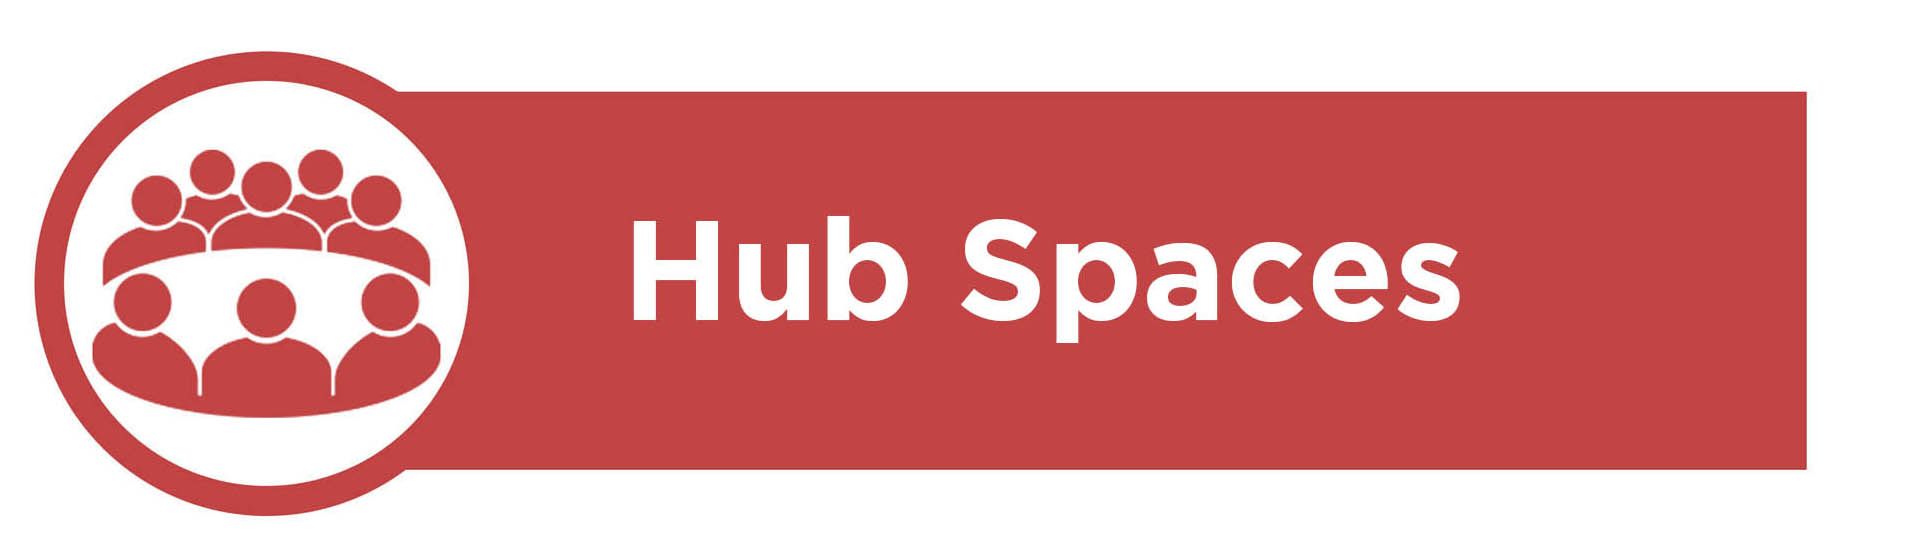 Banner image containing the text 'Hub Spaces'